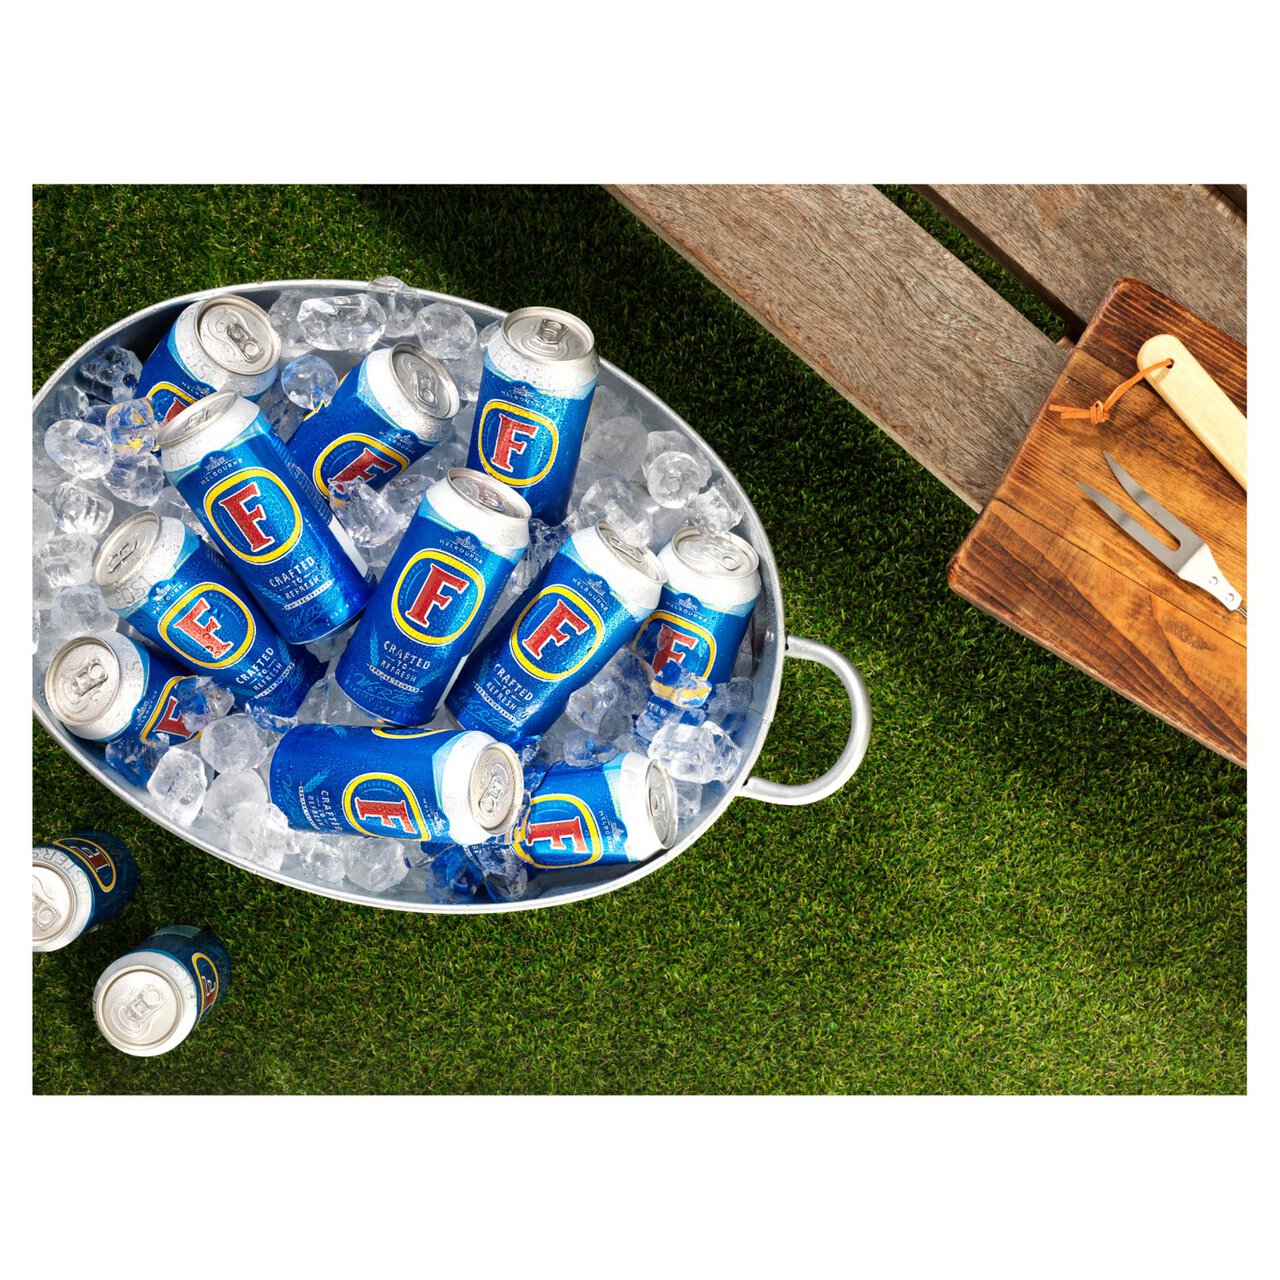 Foster's Lager Beer Cans 4 x 568ml